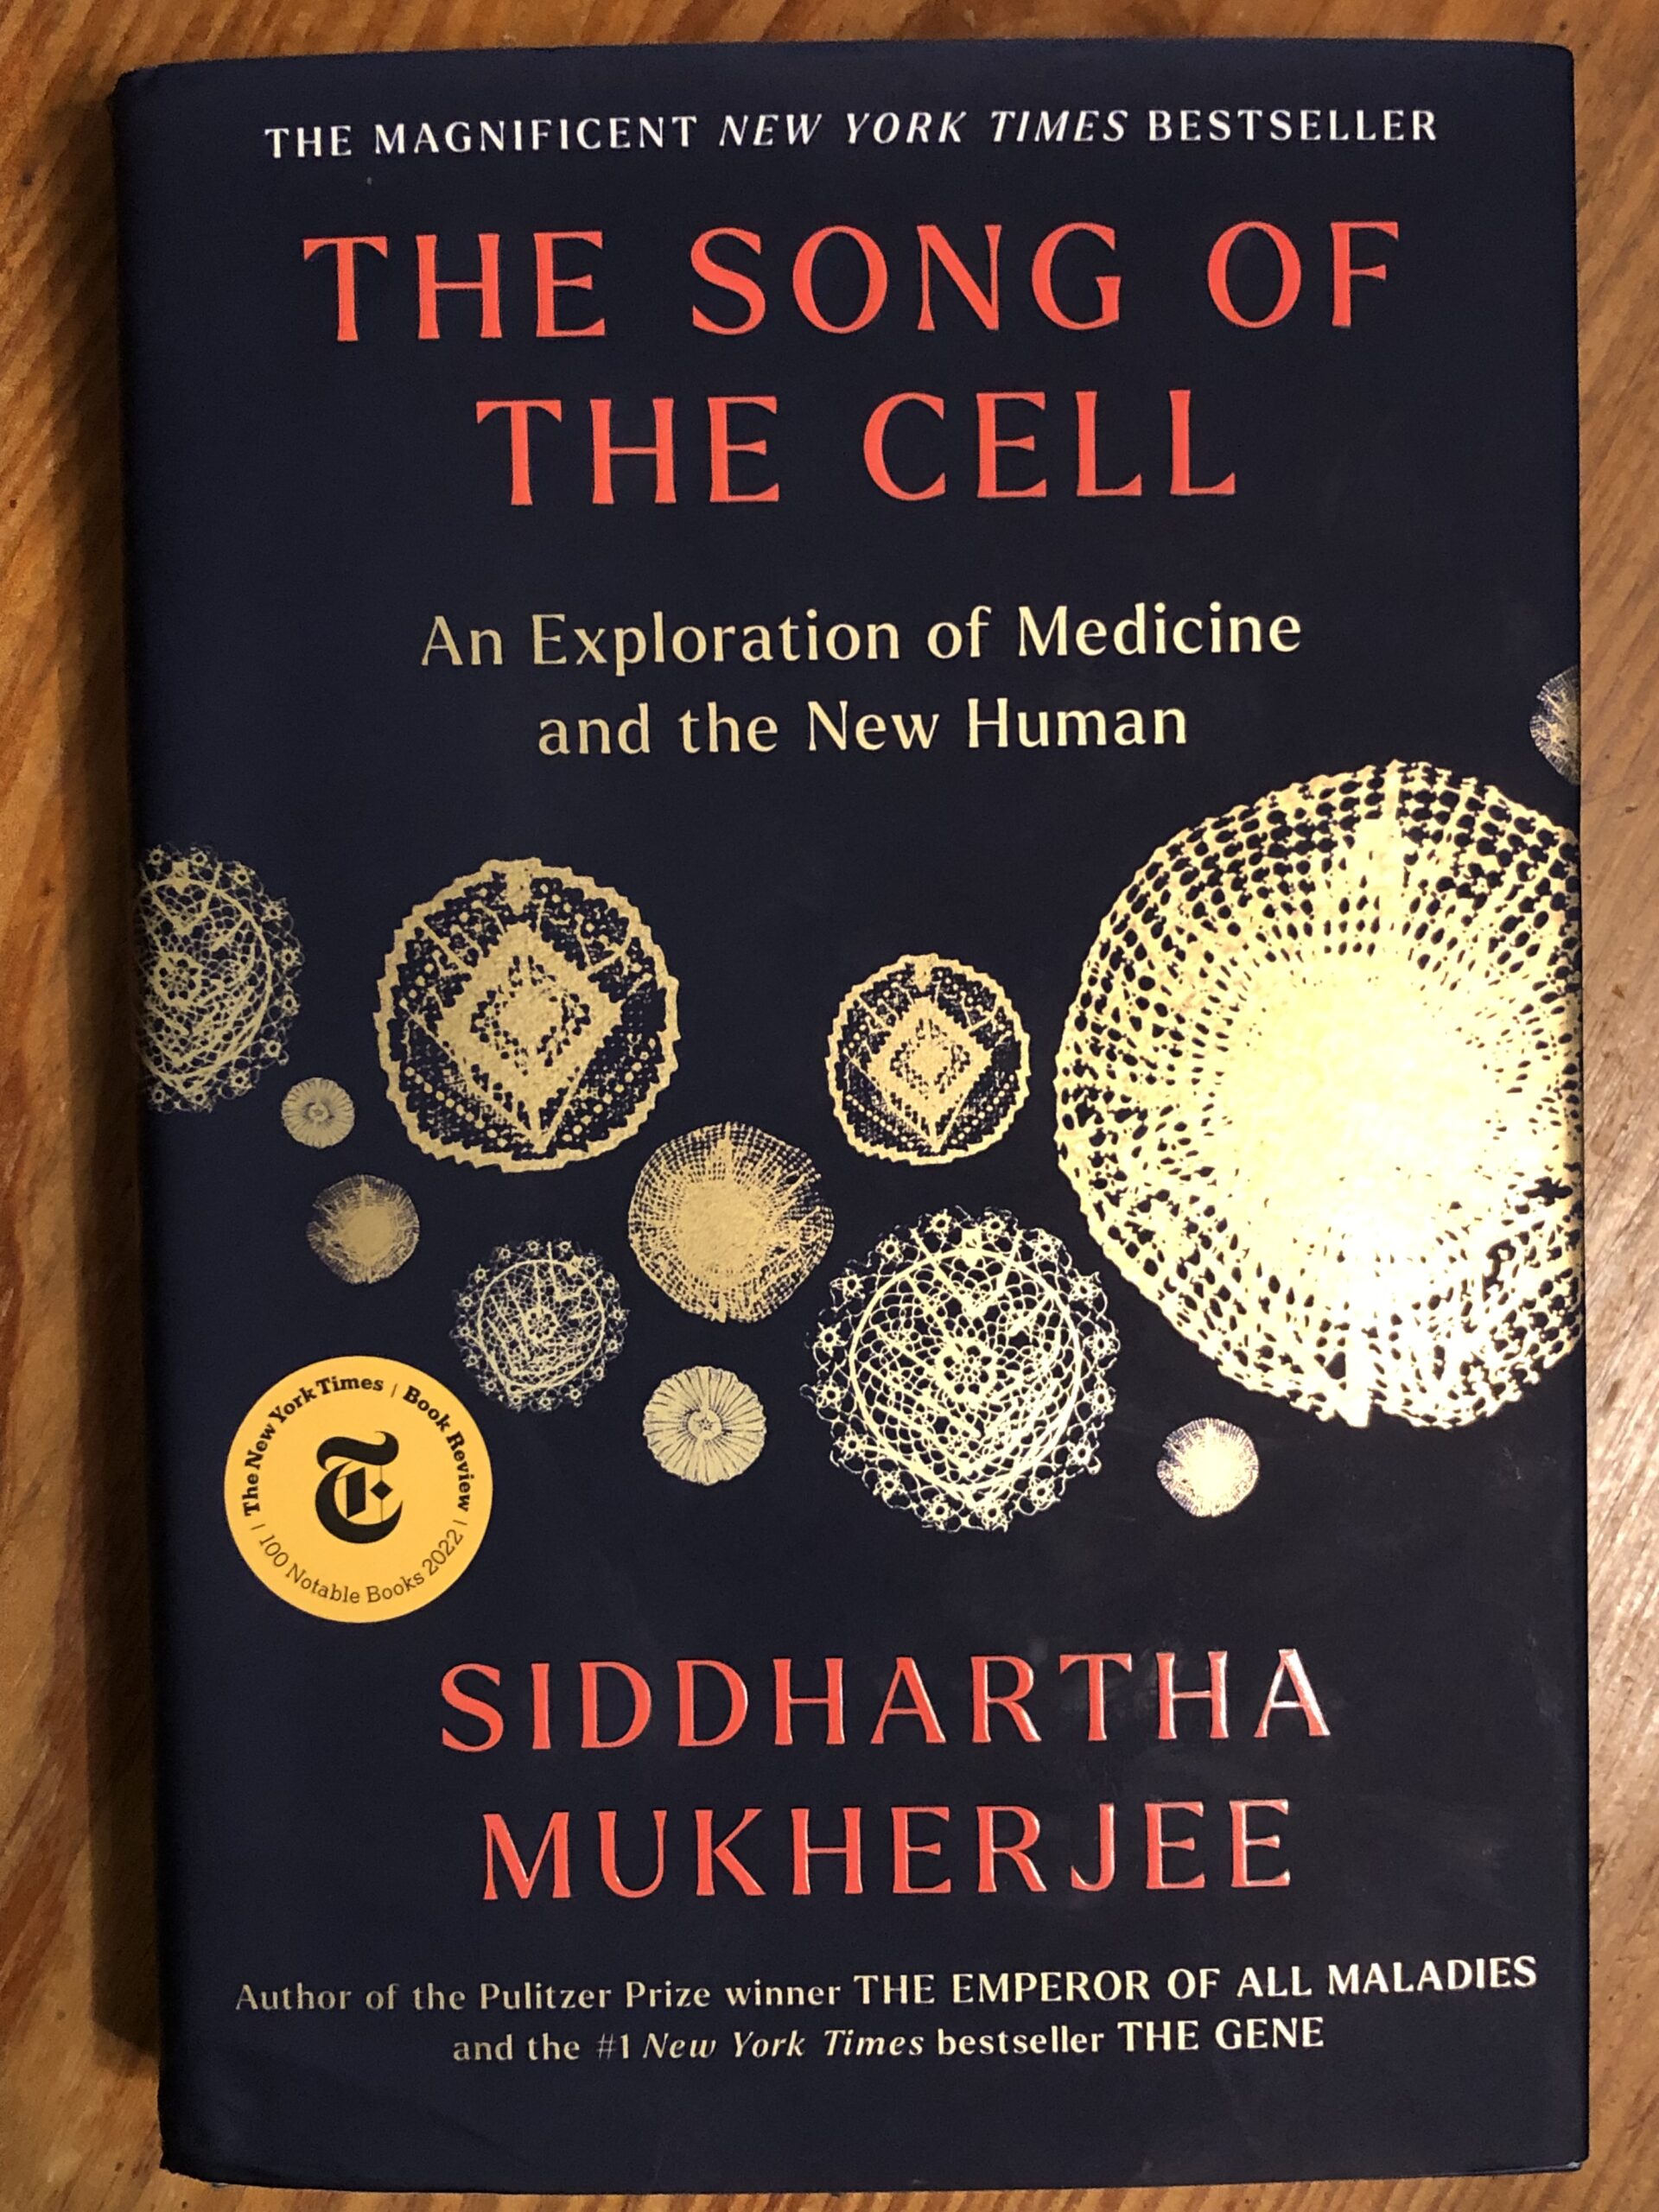 The cover of "The Song of the Cell"